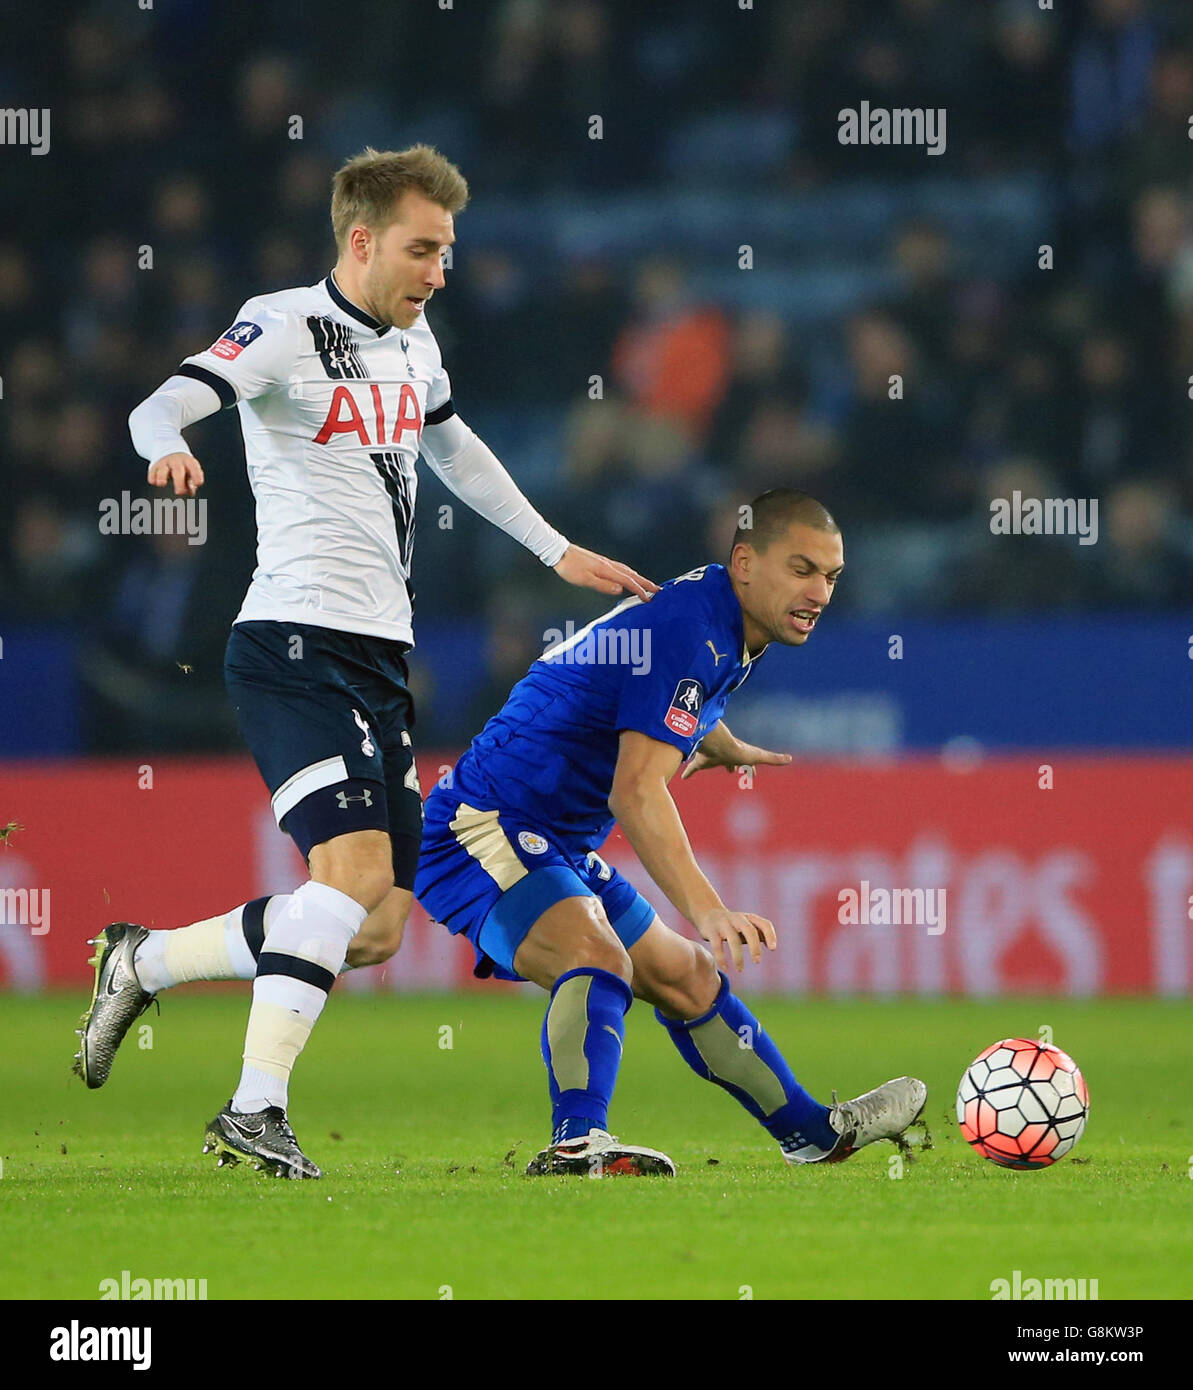 Tottenham Hotspur's Christian Eriksen (left) and Leicester City's Gokhan Inler battle for the ball during the Emirates FA Cup, third round match at the King Power Stadium, Leicester. Stock Photo